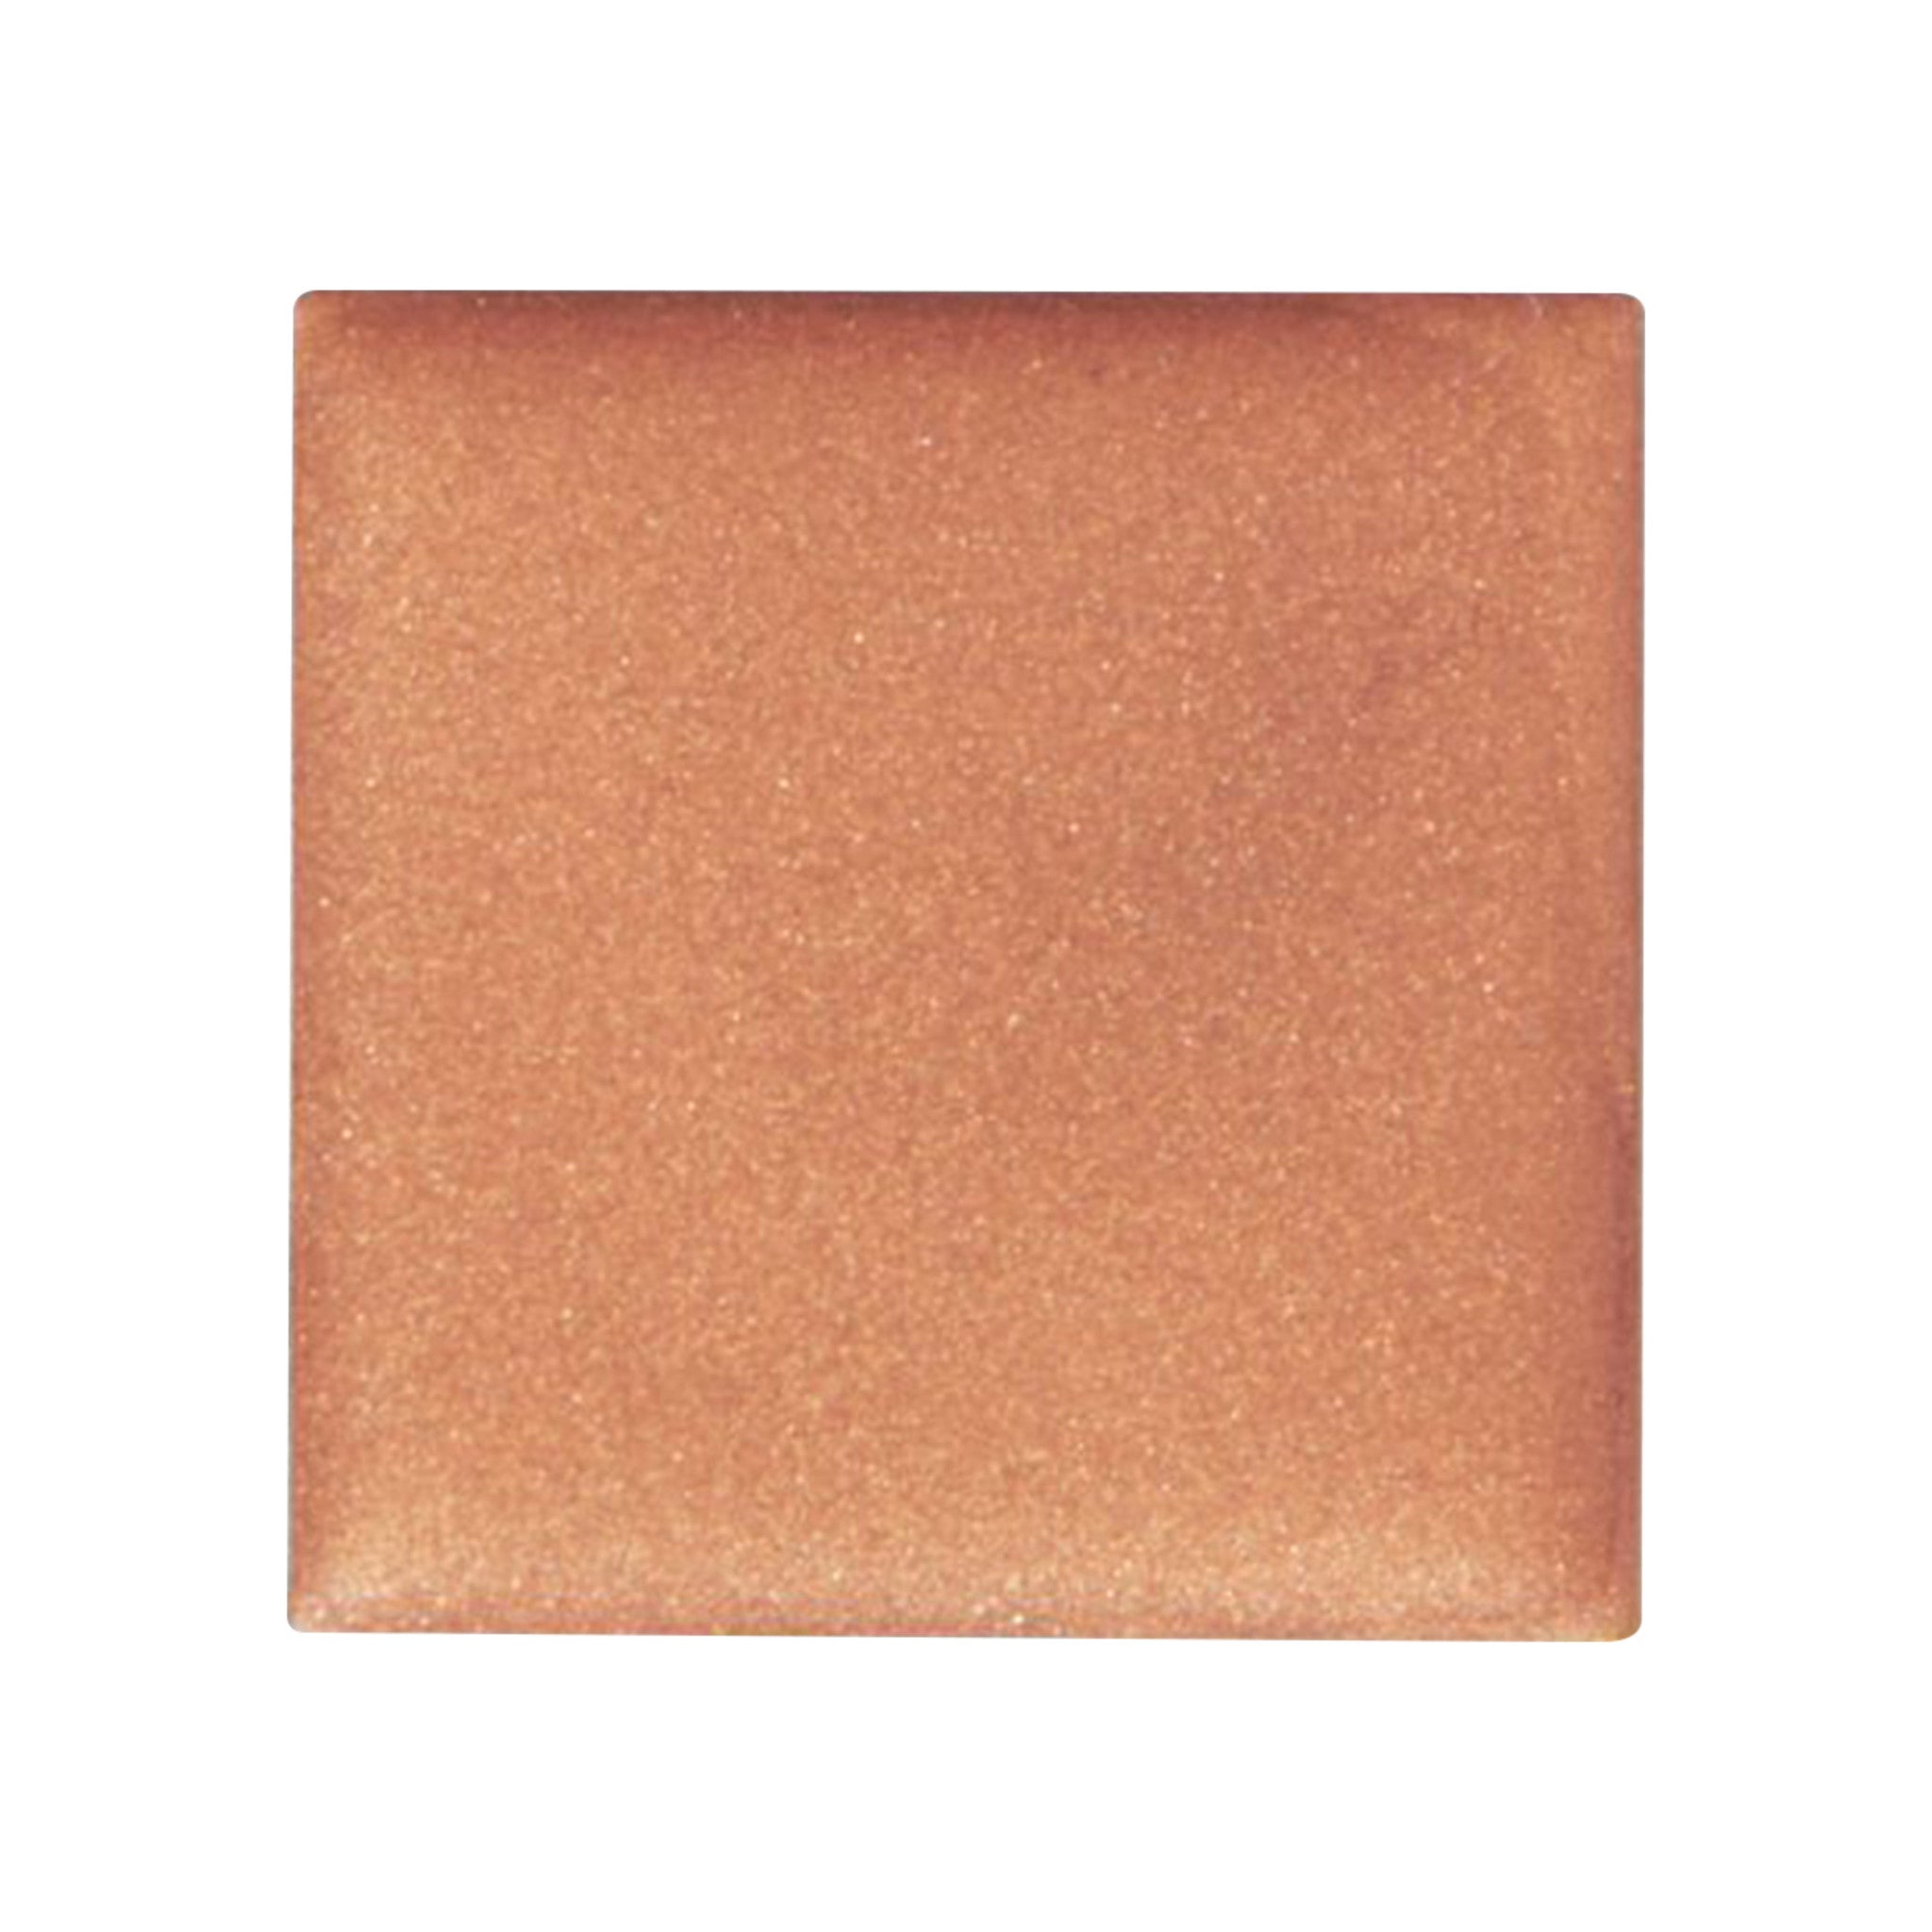 Kjaer Weis Glow Bronzer Refill Color/Shade variant: Lustrous main image.